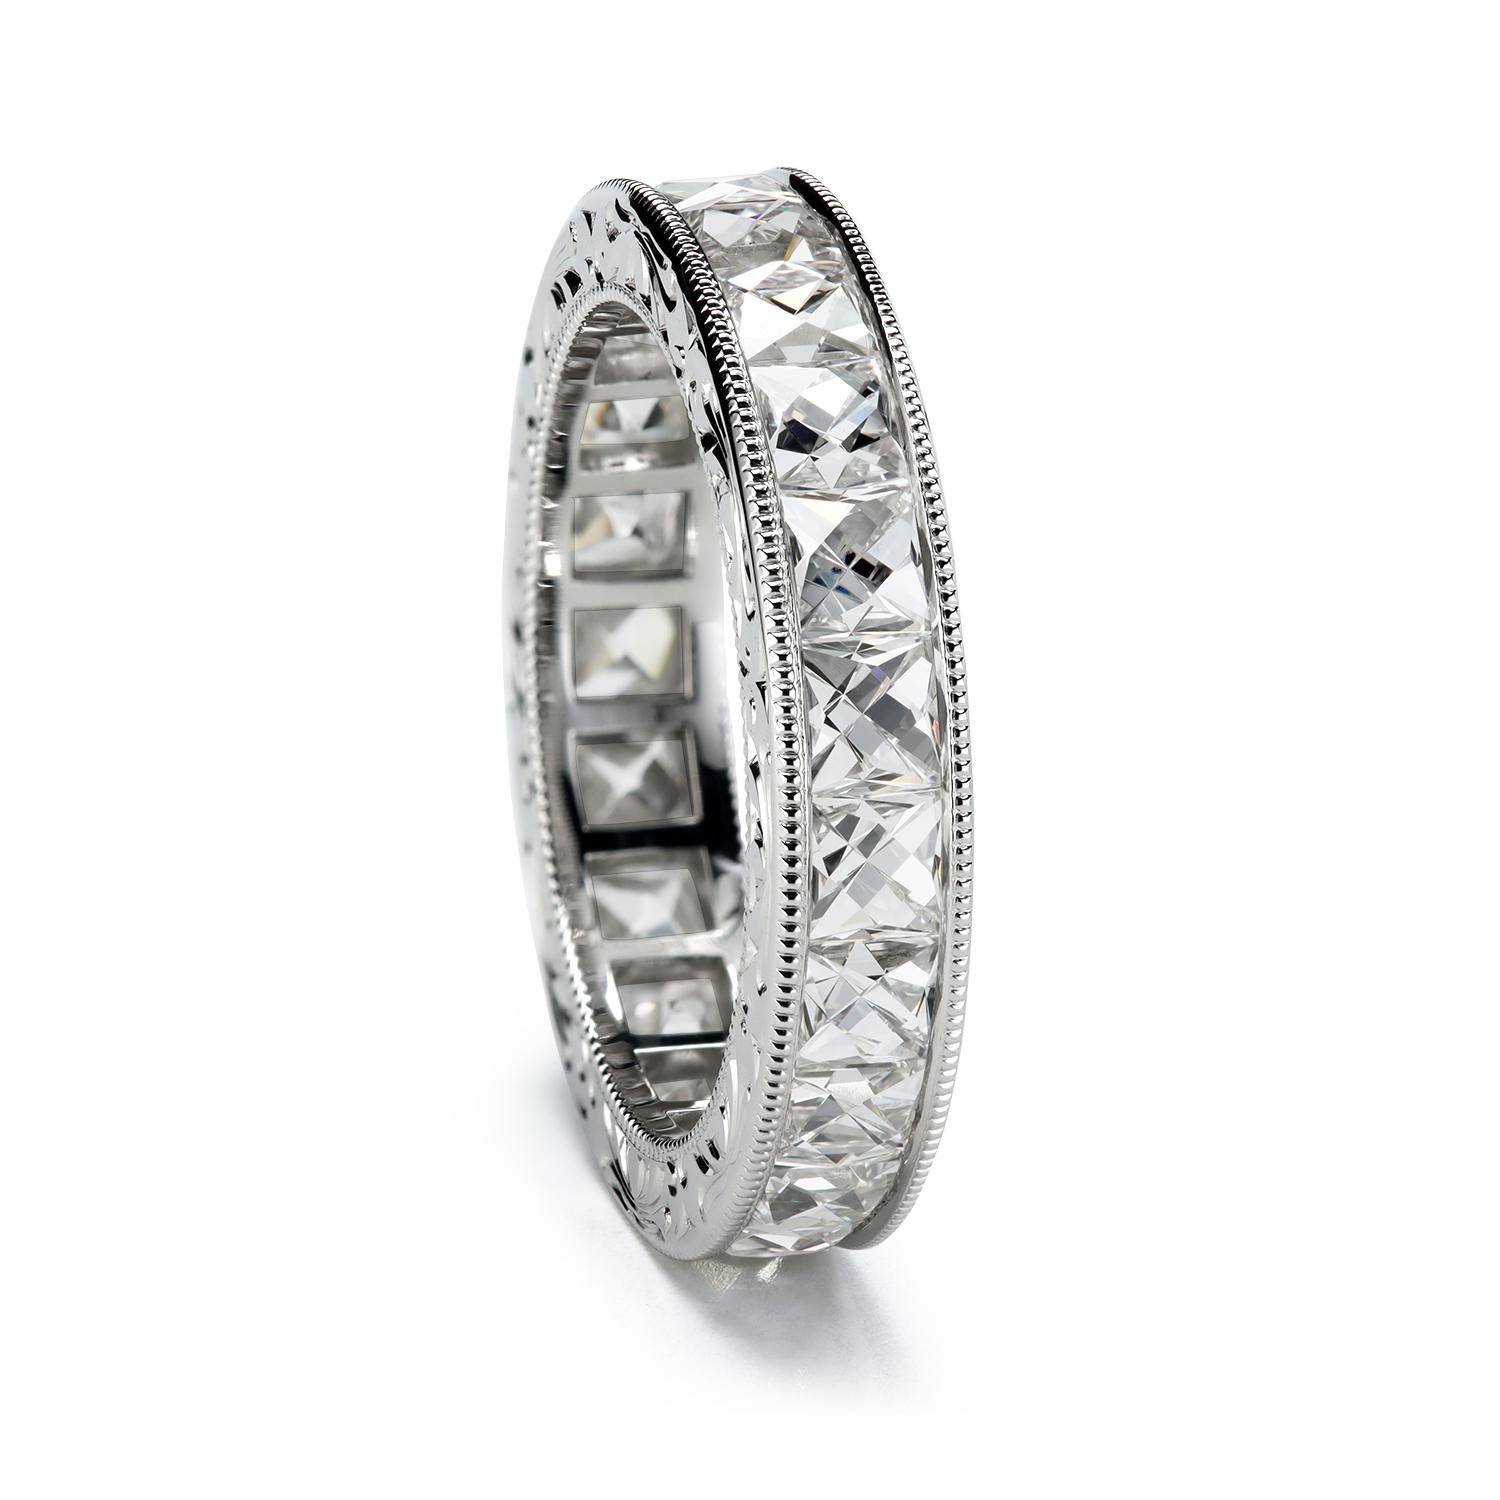 A fusion of art and science in a unique Art Deco-style bespoke wedding band is a work of art by renowned American jeweler Leon Mege. Art Deco style originated in Paris in the 1920s was, and still is, the hallmark of elegance, glamor, functionality,